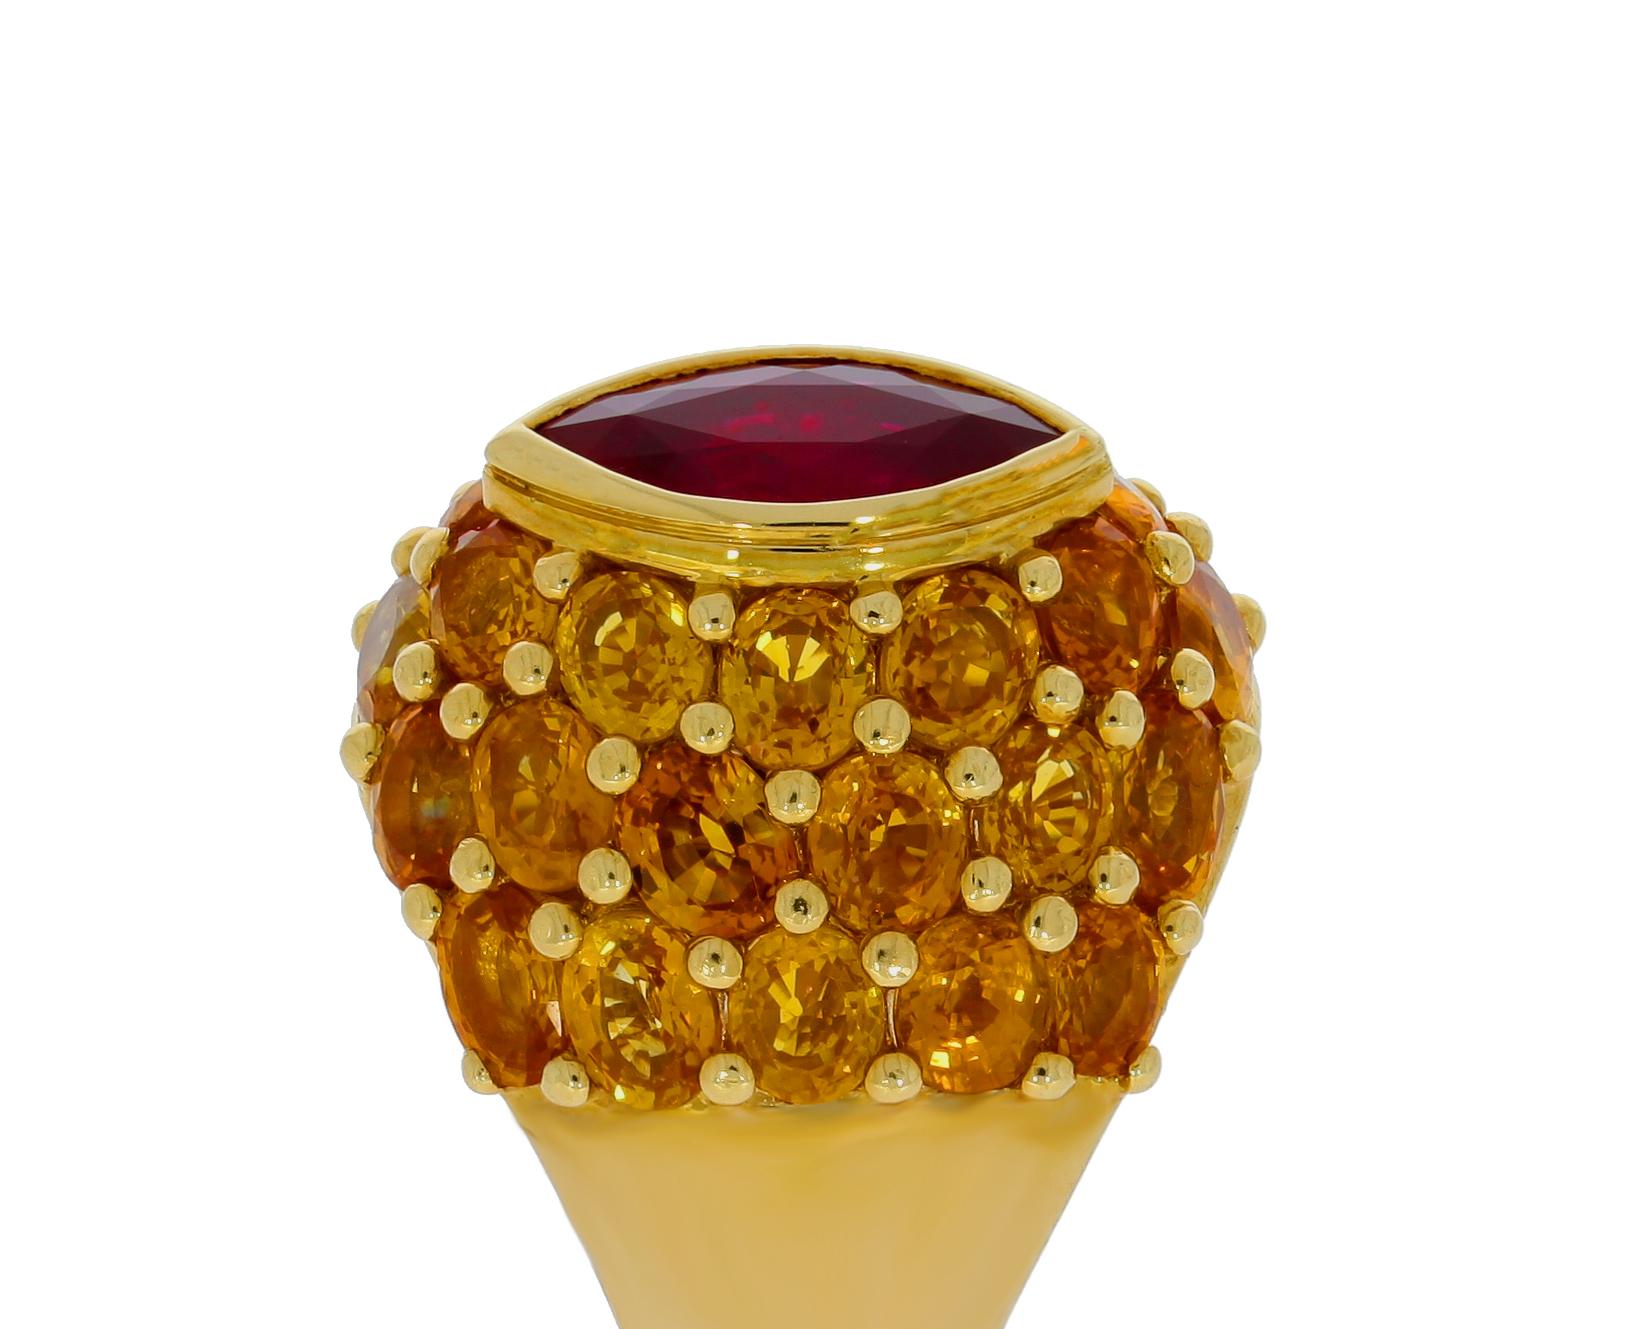 Selected for its rich saturated color, this marquise ruby weighs 2.34 carats, and is surrounded by 12.15 carats of yellow sapphires embedded in 18 carat yellow gold for a unique pop of color.